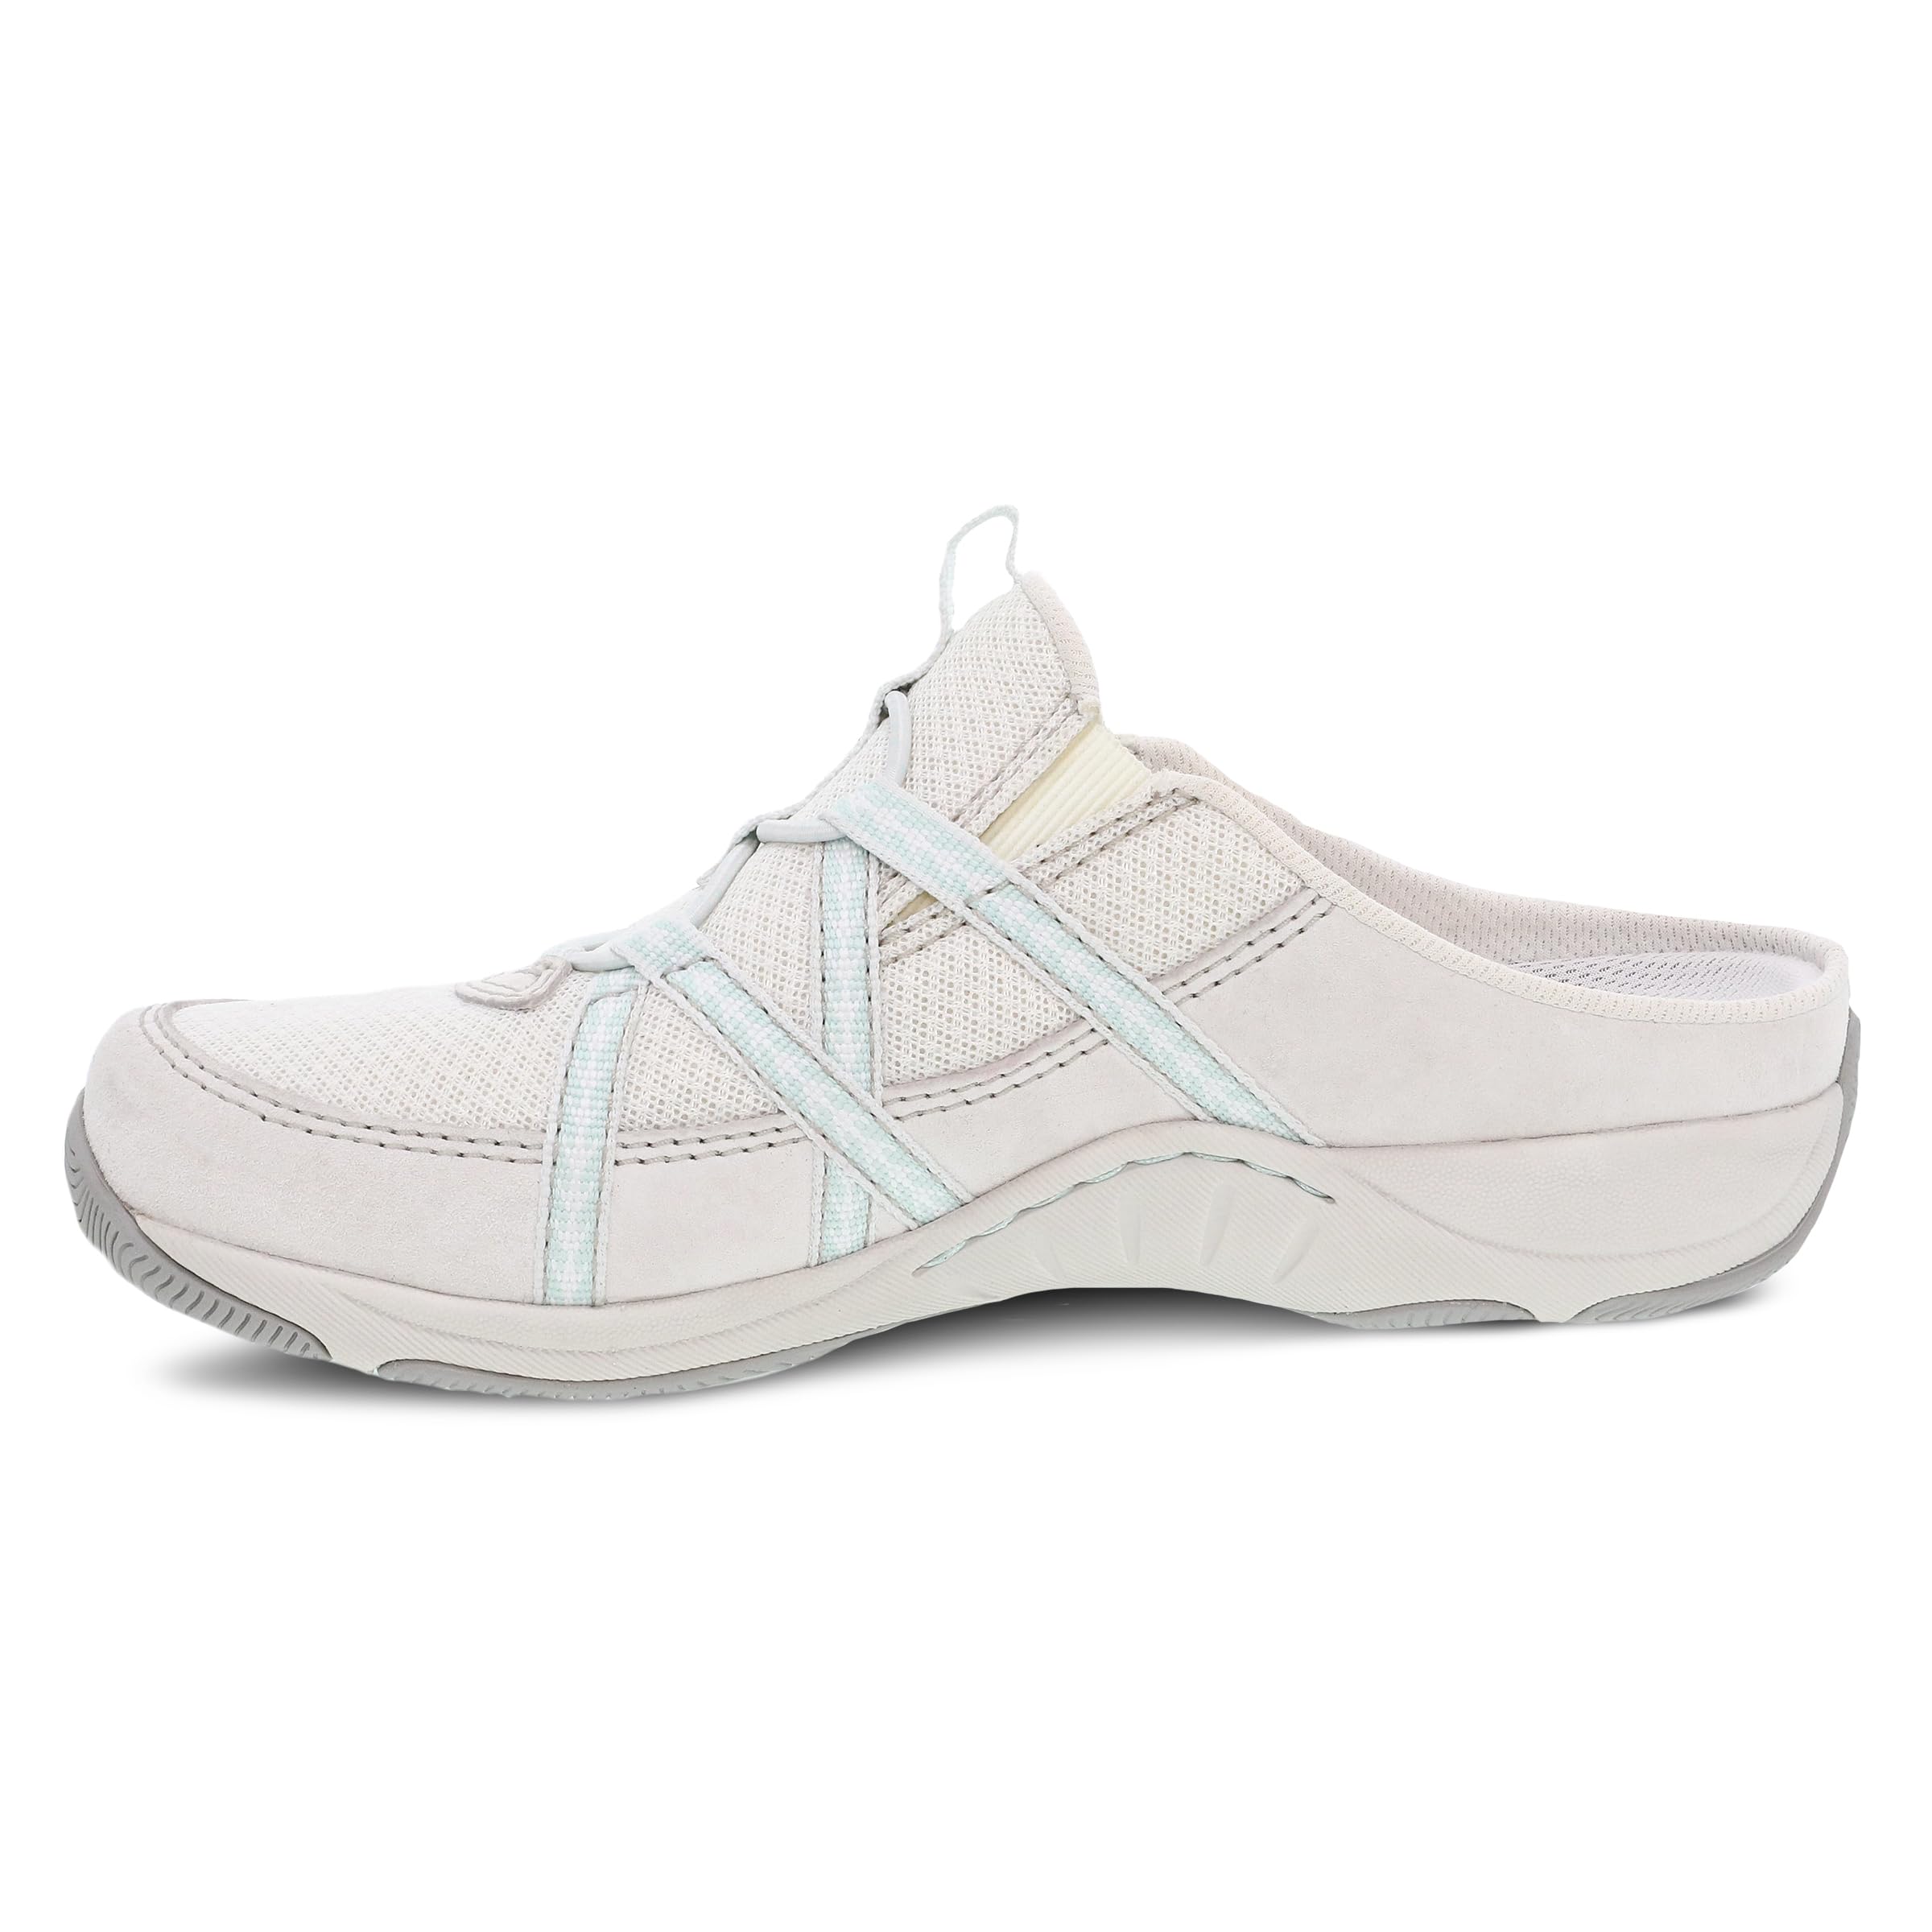 Dansko Hayleigh Lightweight Sneaker for Women - Stain Resistant Leather and Nylon Uppers and Arch Support in Flexible Style